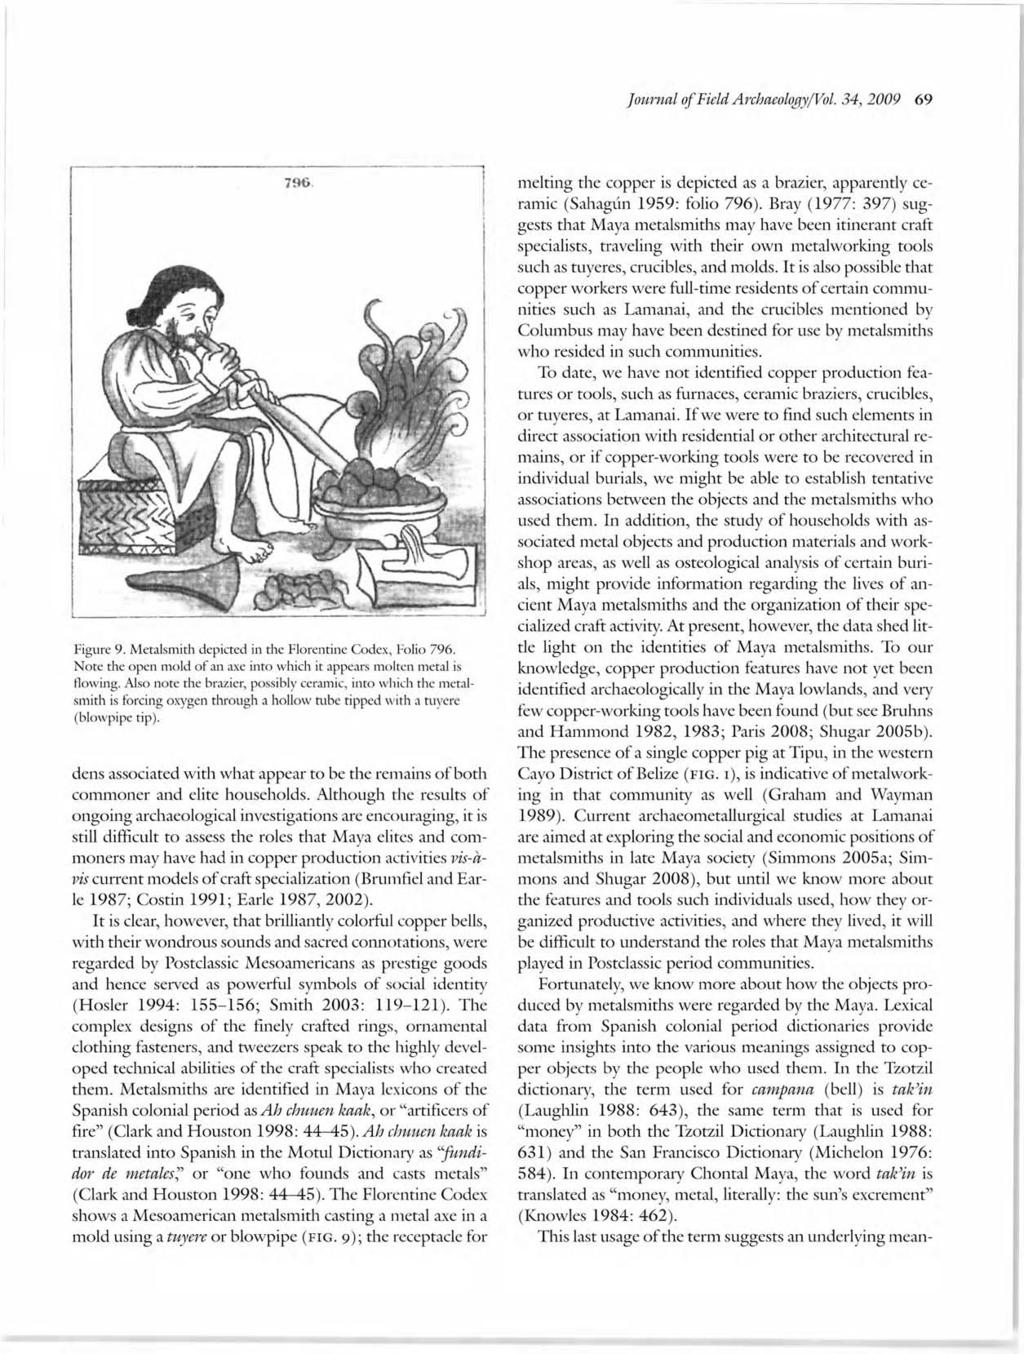 Journal of Field Archaeology(Vol. 34) 2009 69 196. Figure 9. Metalsmith depicted in the Florentine Codex, Folio 796. Note the open mold of an axe into which it appears molten metal is flowing.